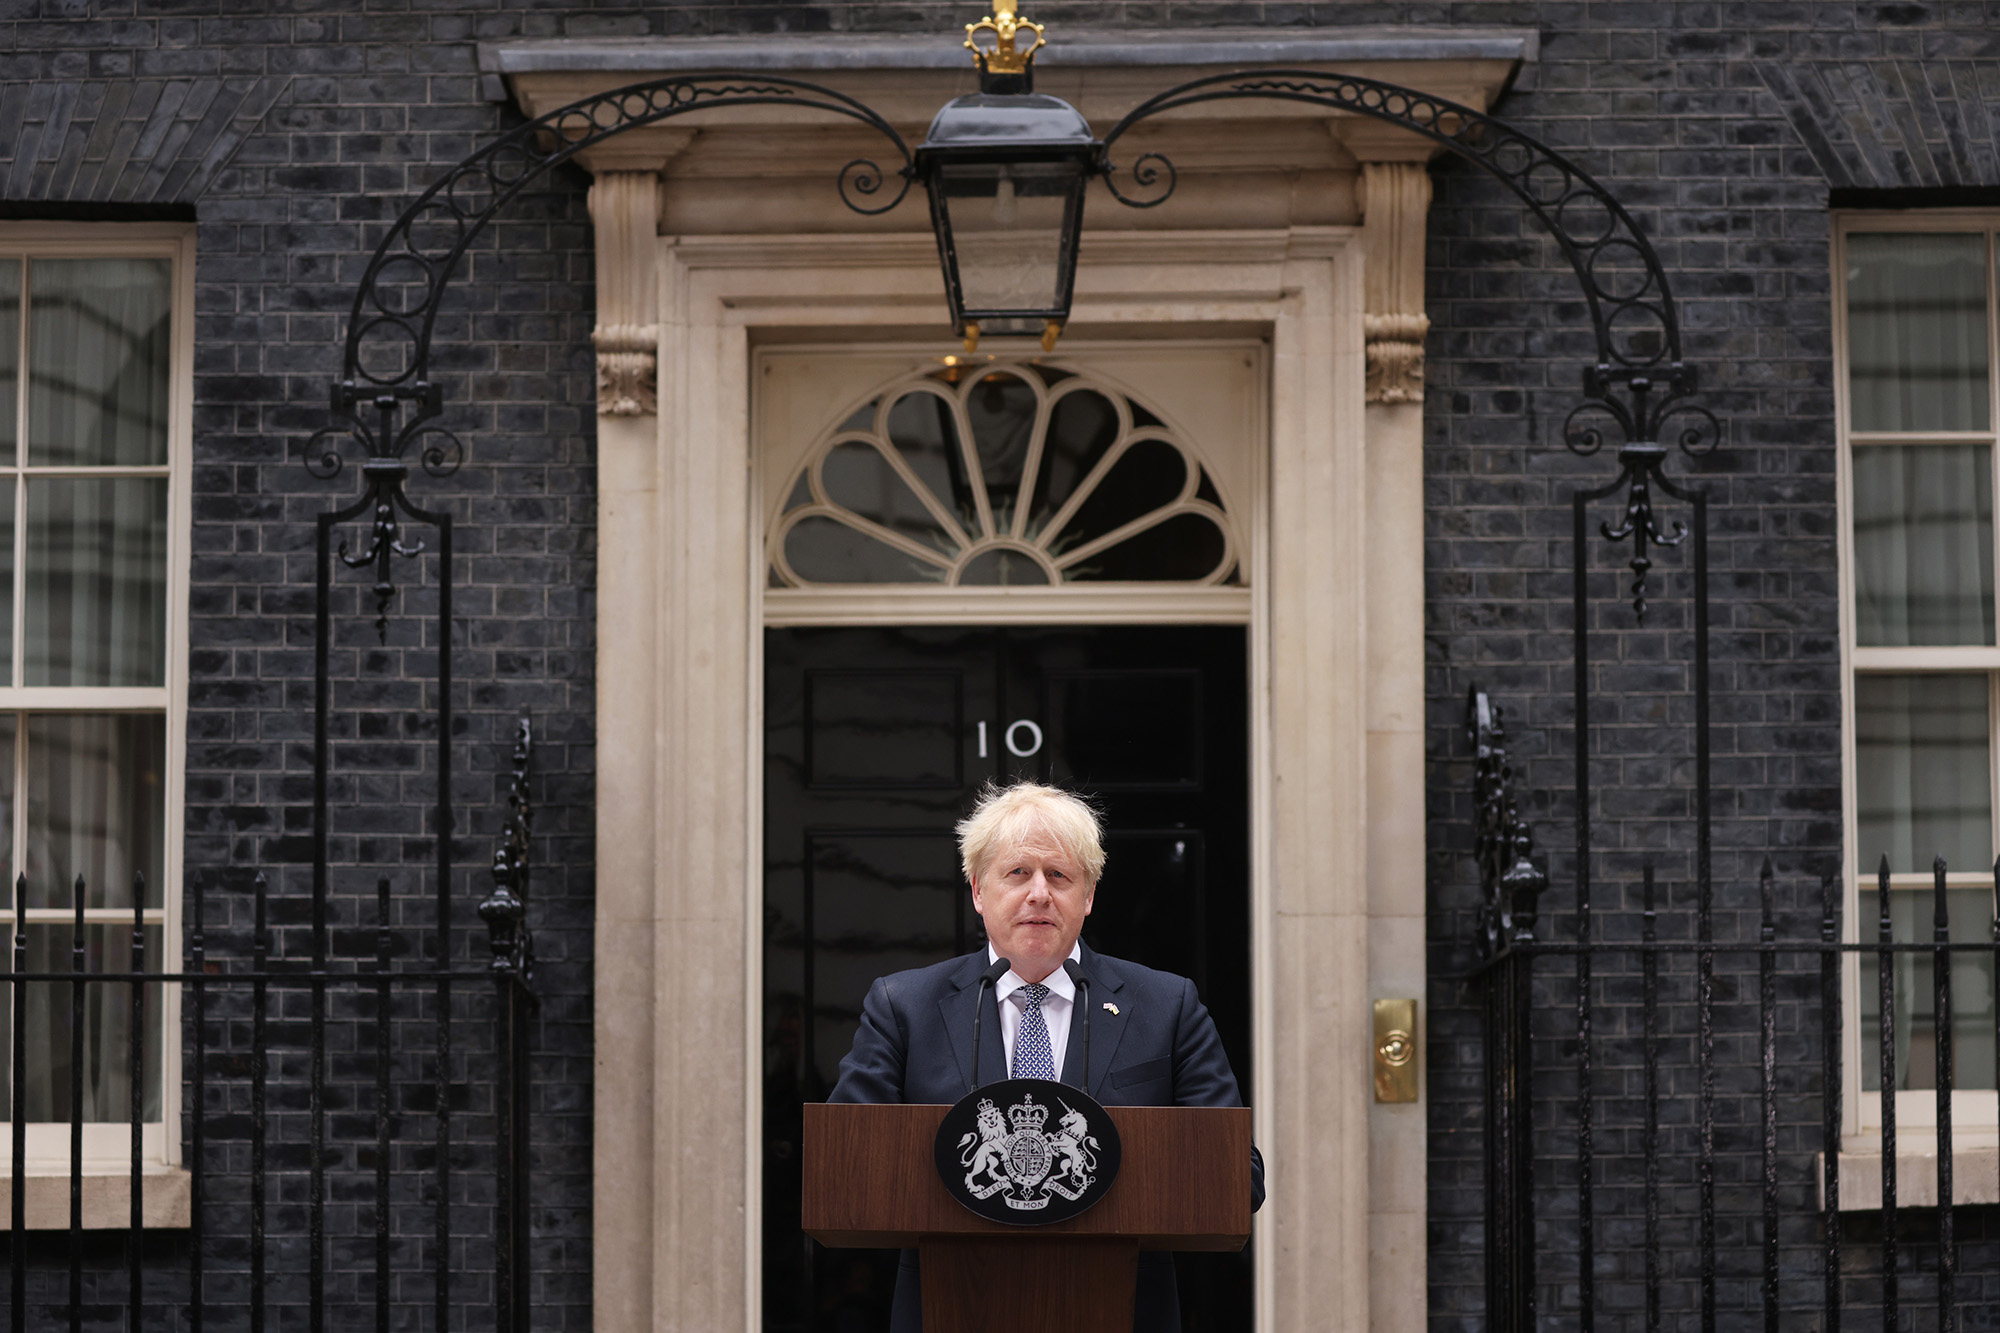 Prime Minister Boris Johnson addresses the nation as he announces his resignation outside 10 Downing Street in London, England, on July 7.